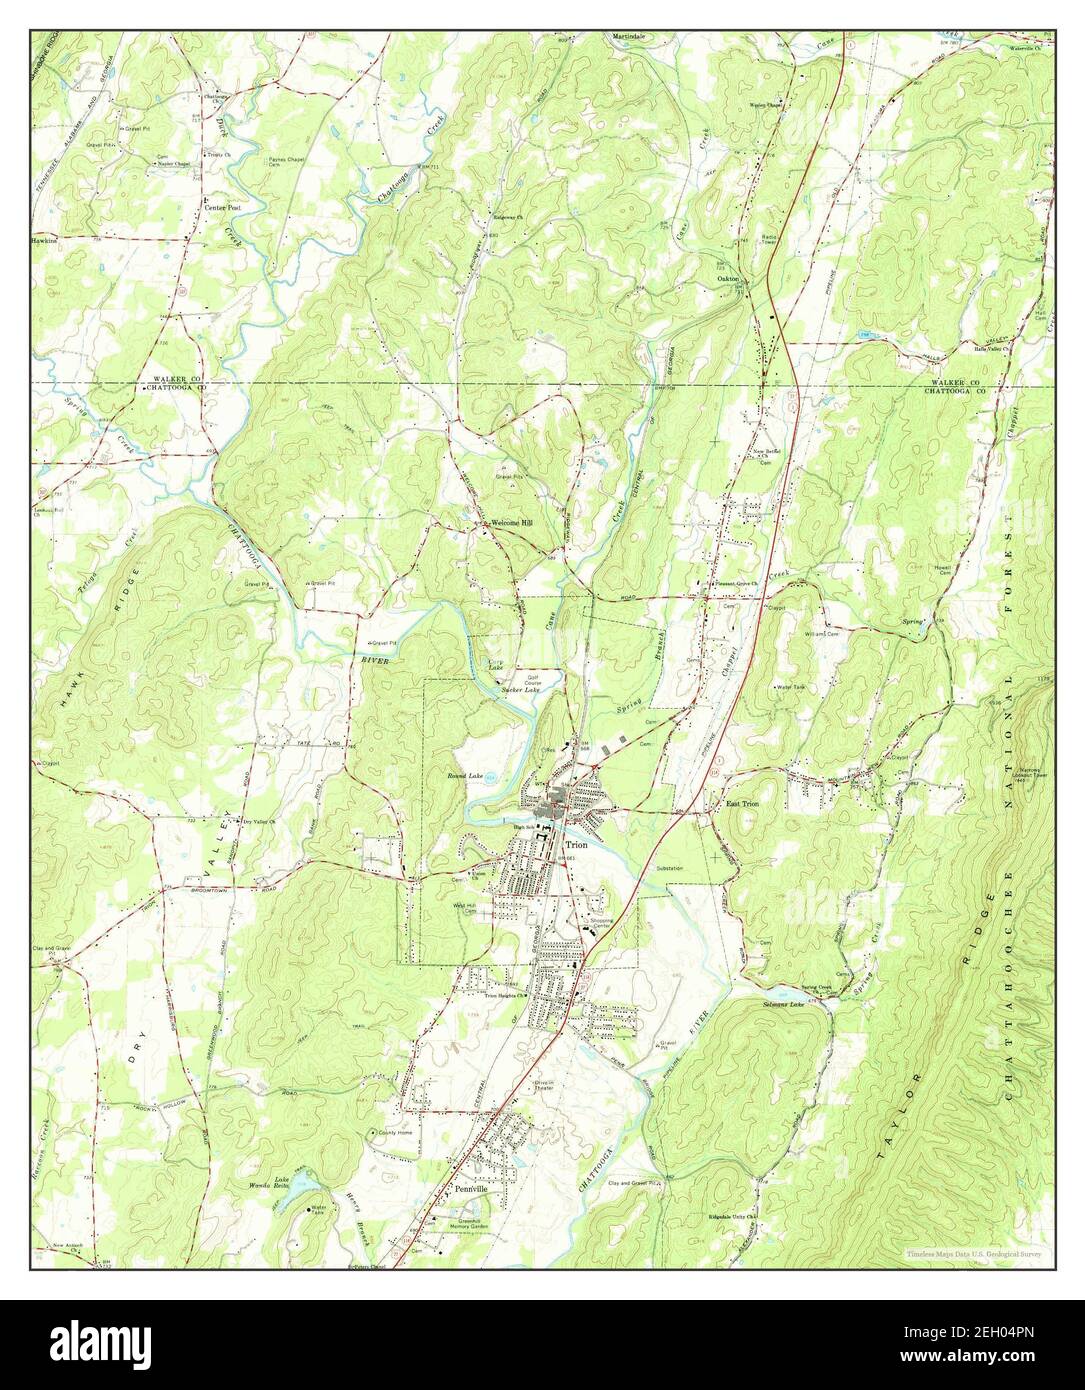 Trion, Georgia, map 1967, 1:24000, United States of America by Timeless Maps, data U.S. Geological Survey Stock Photo